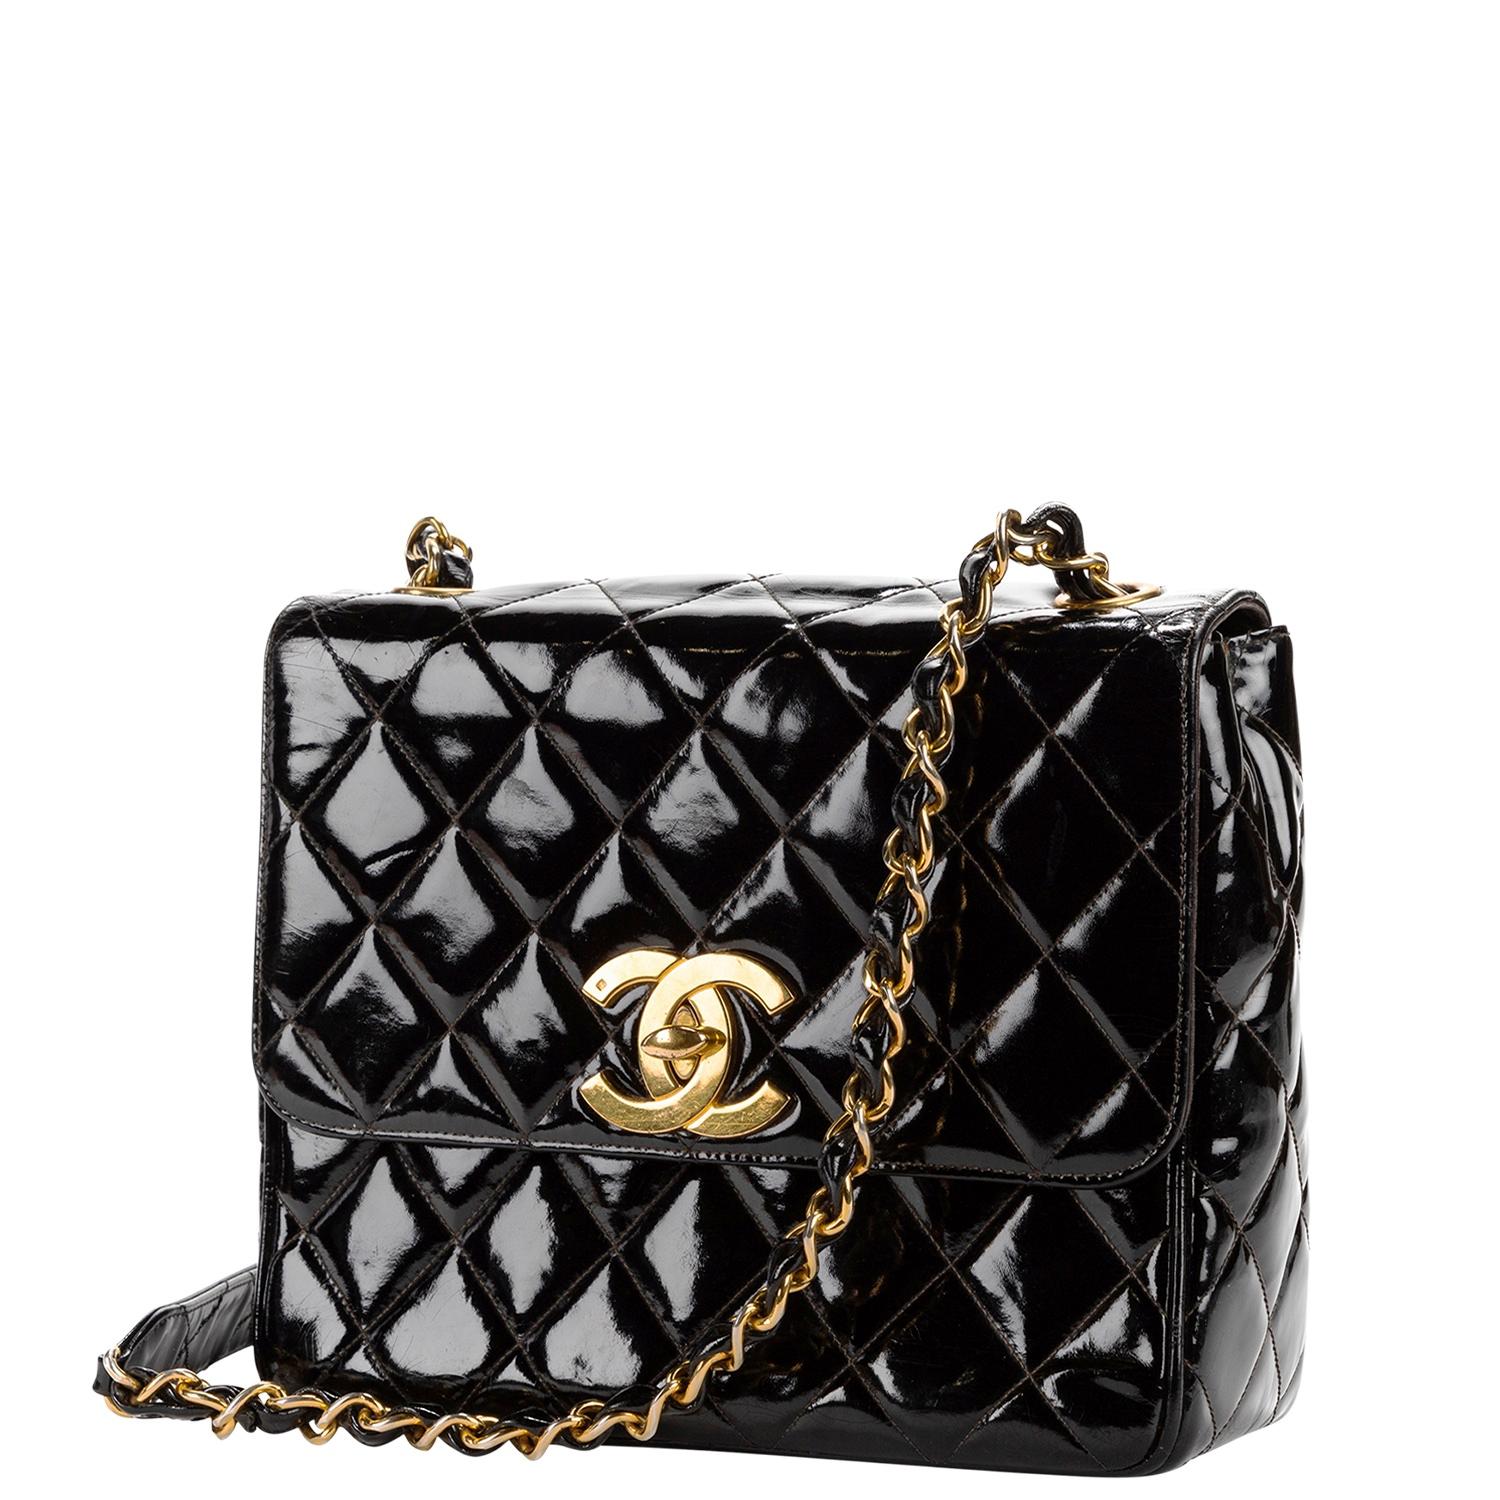 Unbelievably stunning vintage Chanel treasure. We are obsessed with the oversized CC 24K gold plated hardware and the chunkier single chain-link strap! This is the queen mother of Chanel. In a gorgeous black quilted patent, and a wonderful square